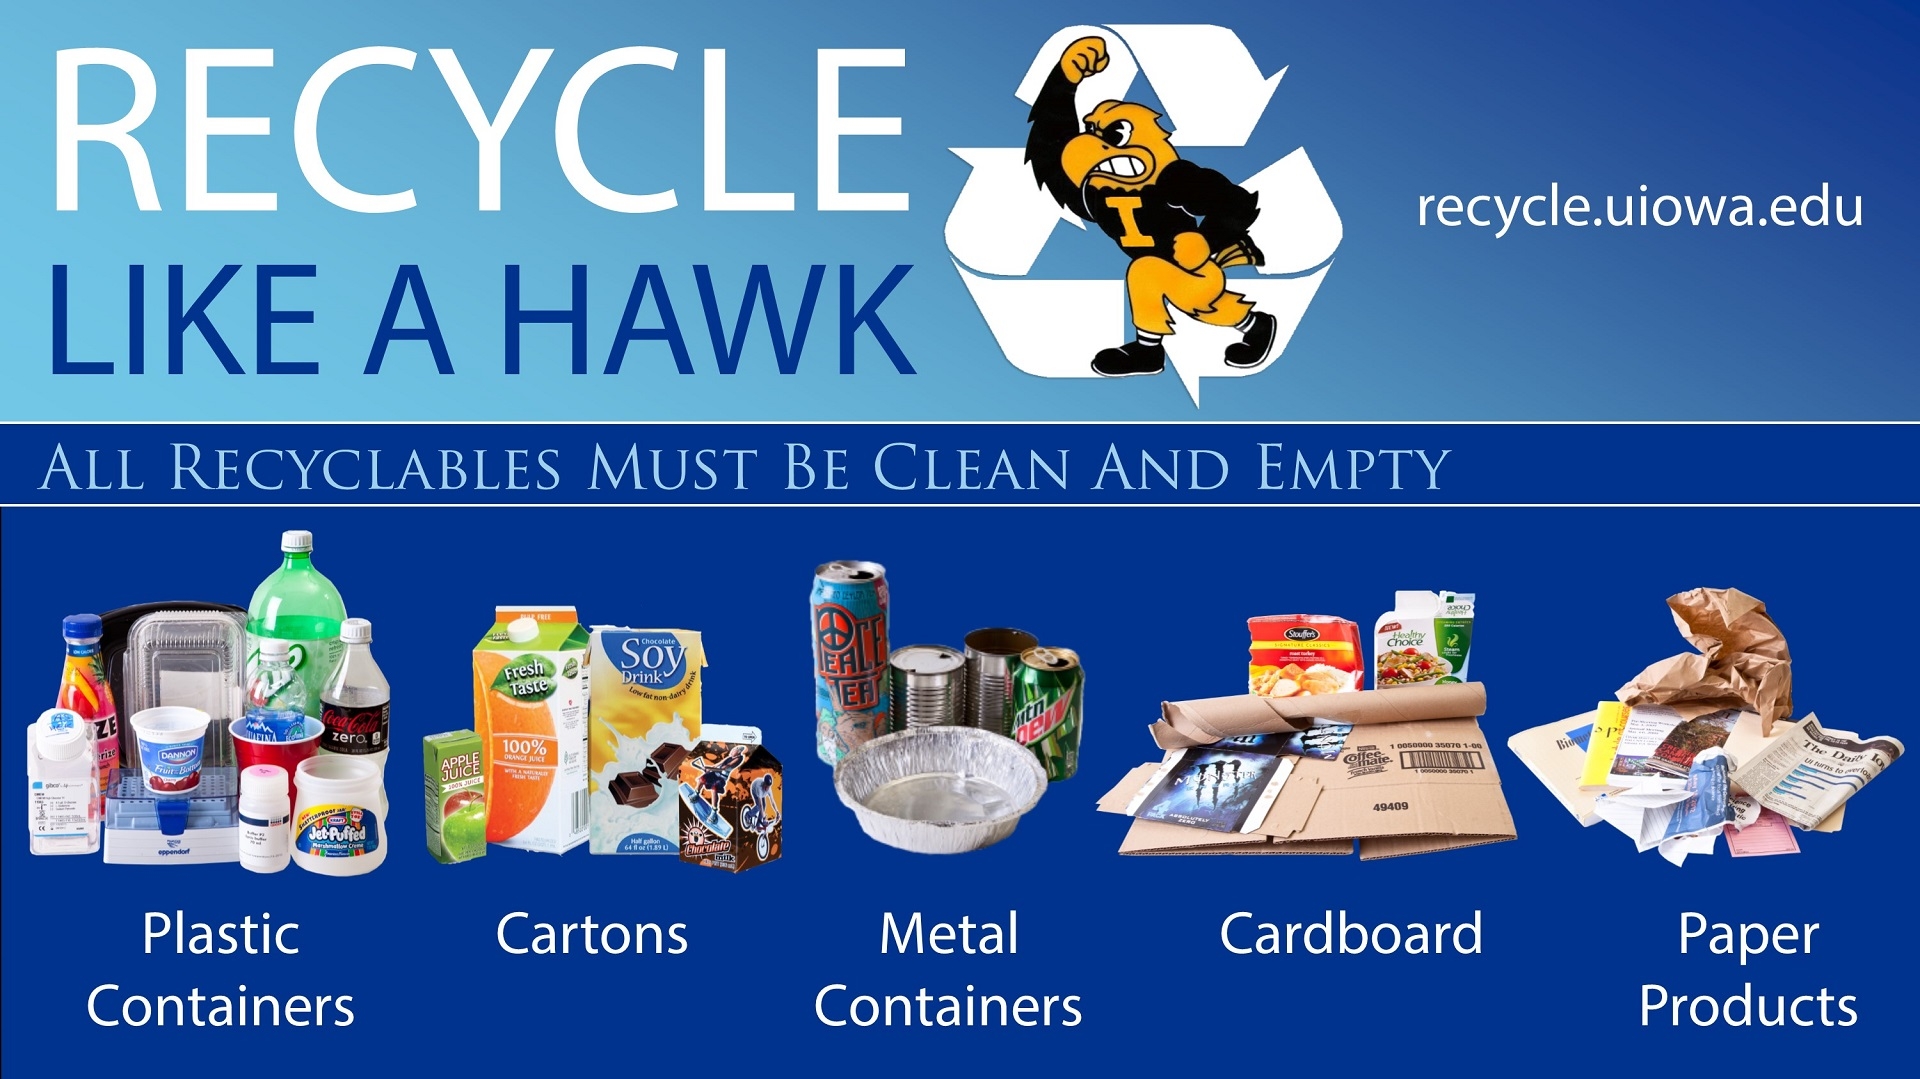 Recycle like a Hawk - more information recycle.uiowa.edu - All Recyclables Must Be Clean and Empty: Plastic Containers, Metal Containers, Flattened Cardboard, Cartons, Paper Products. Do not recycle: Glass, Styrofoam, Plastic Bags. Food